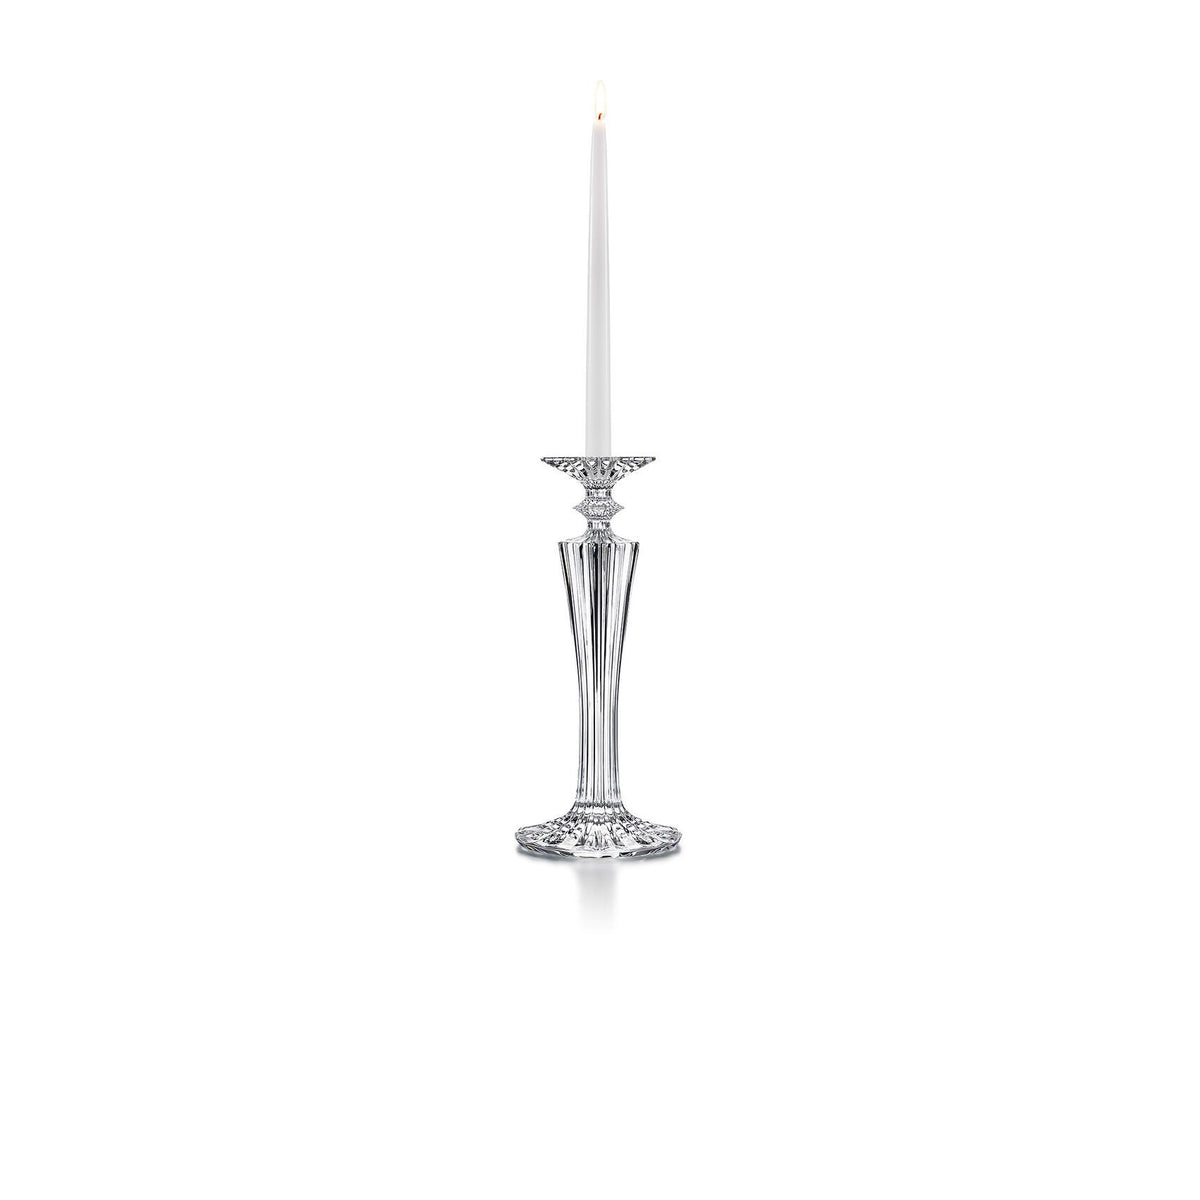 Mille Nuits Candlestick